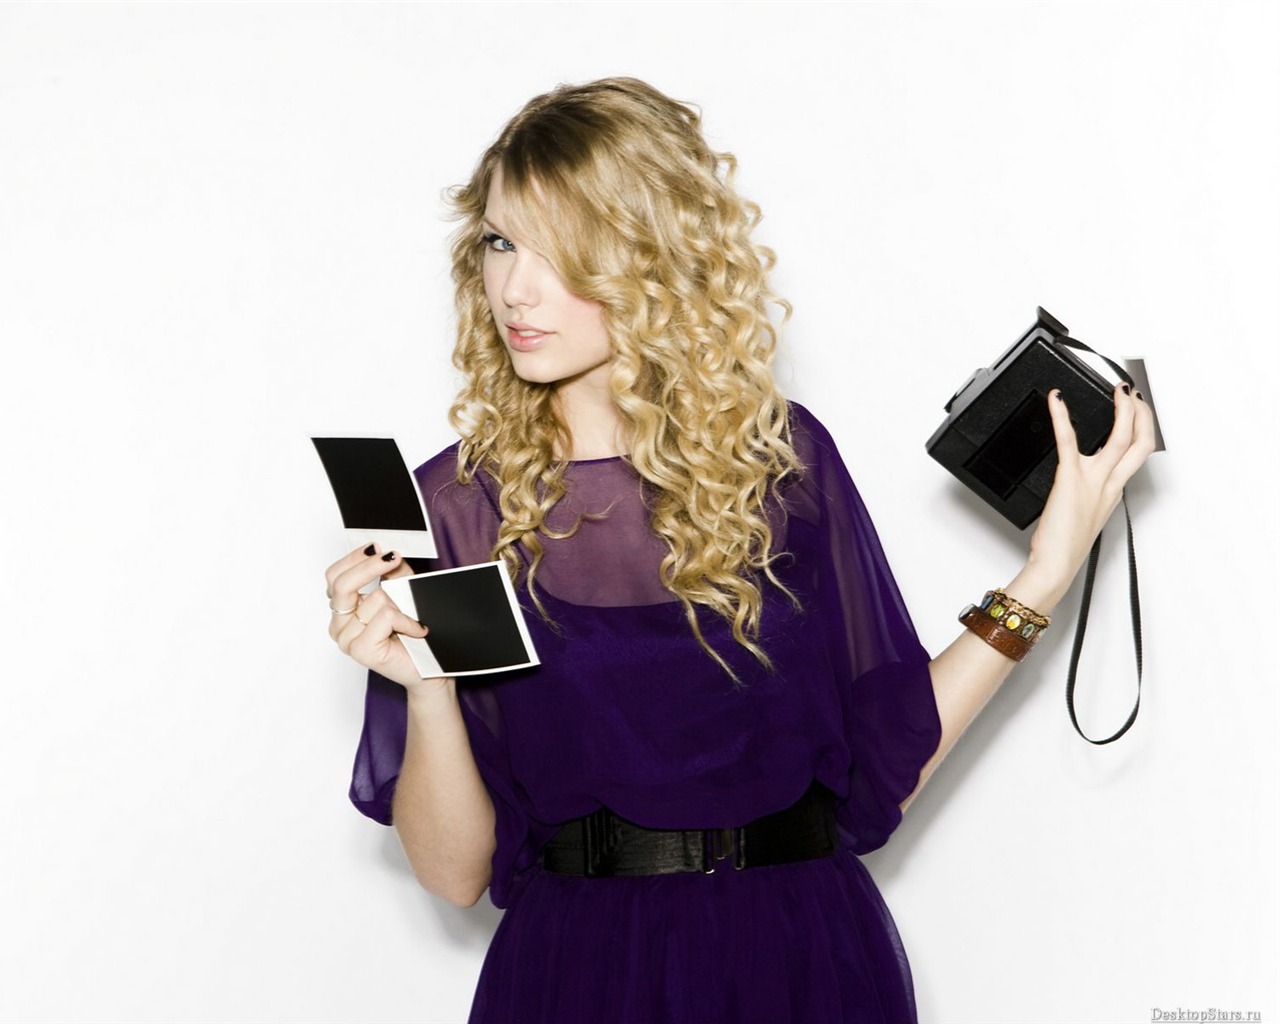 Taylor Swift #019 - 1280x1024 Wallpapers Pictures Photos Images